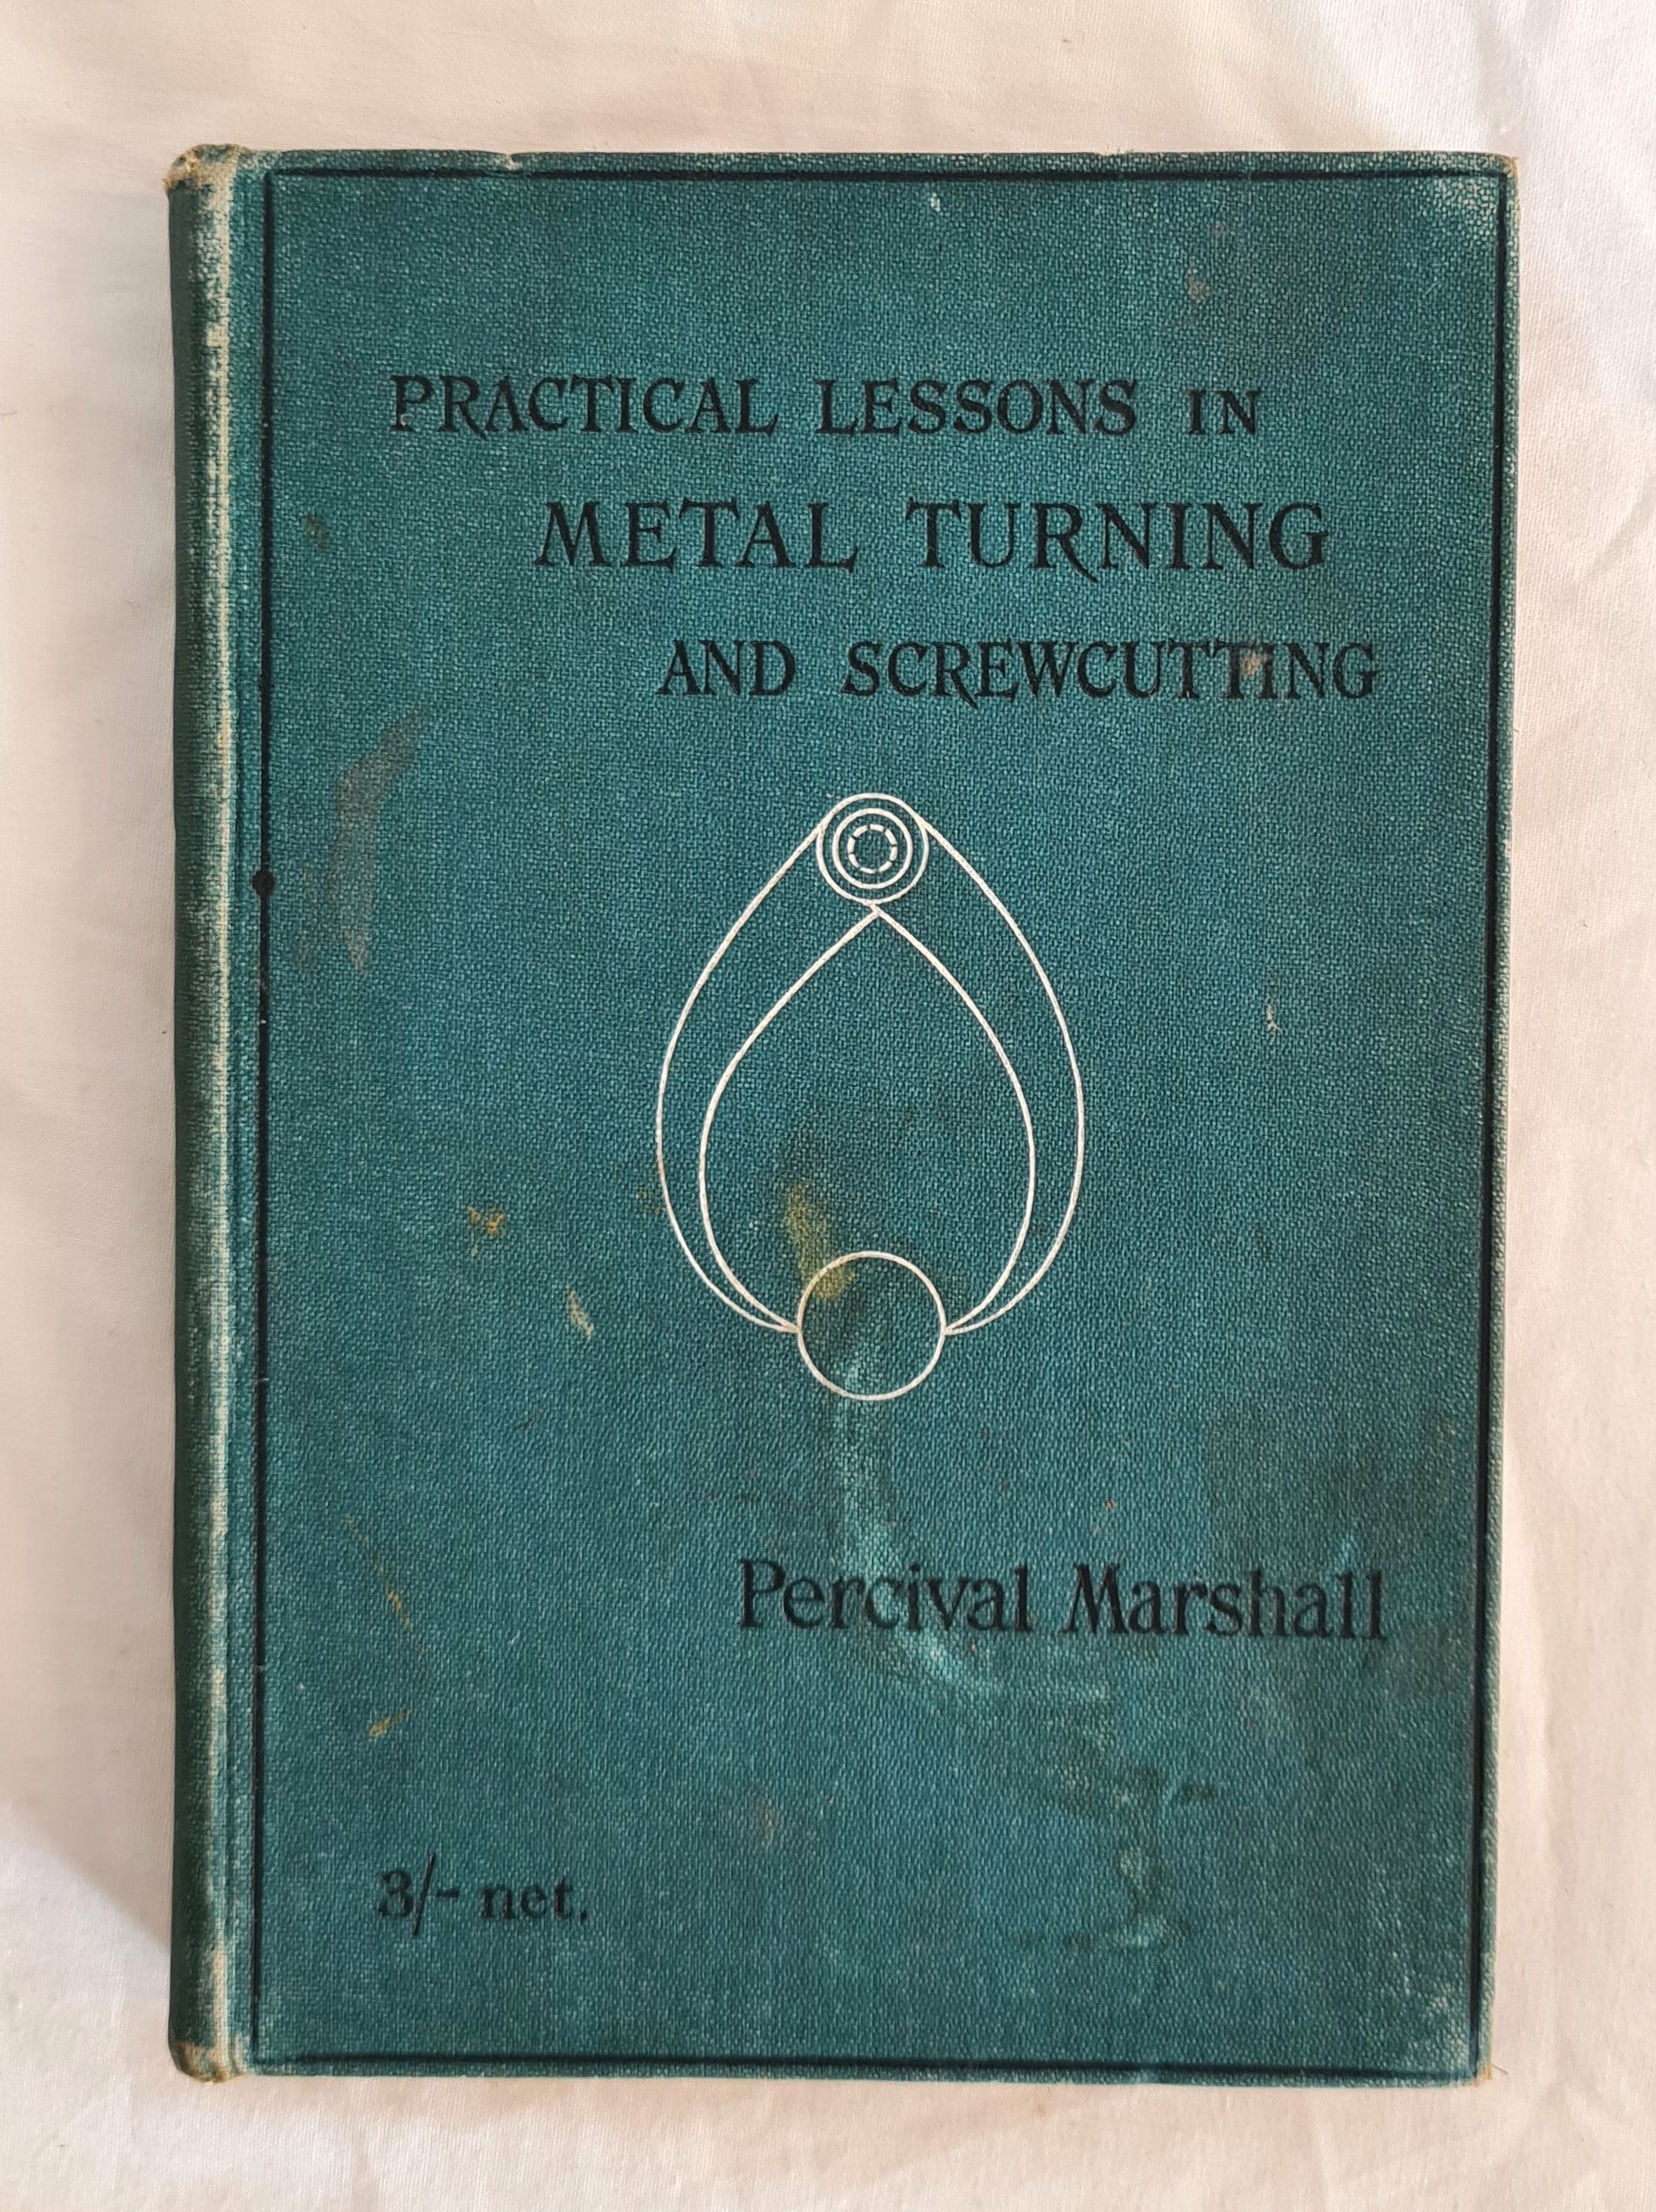 Practical Lessons in Metal Turning and Screw Cutting  A Handbook for Young Engineers, Apprentices and Amateur Mechanics  by Percival Marshall